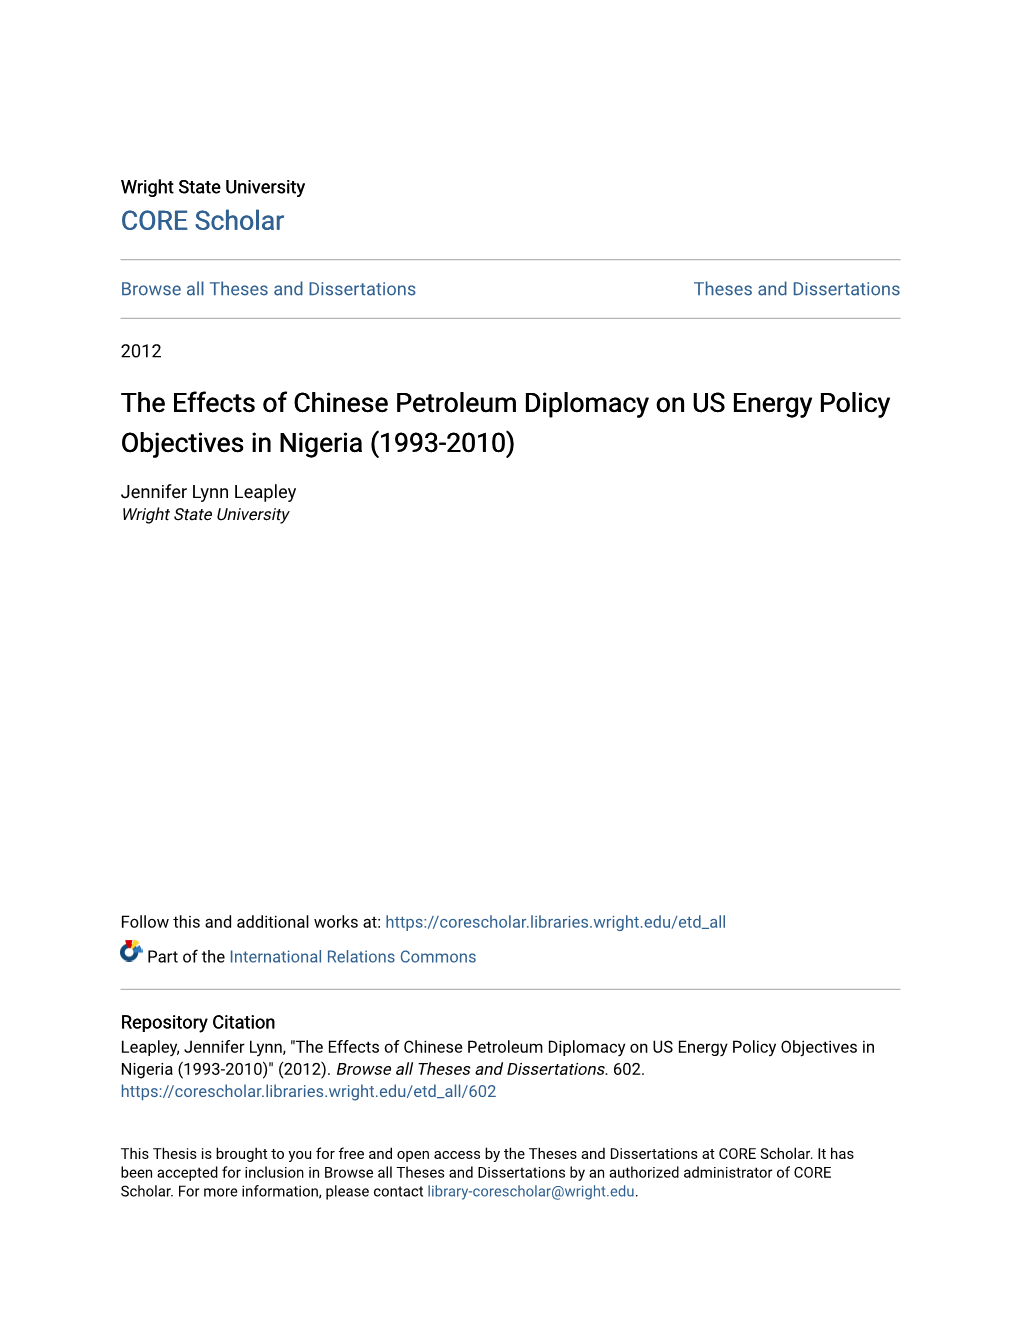 The Effects of Chinese Petroleum Diplomacy on US Energy Policy Objectives in Nigeria (1993-2010)